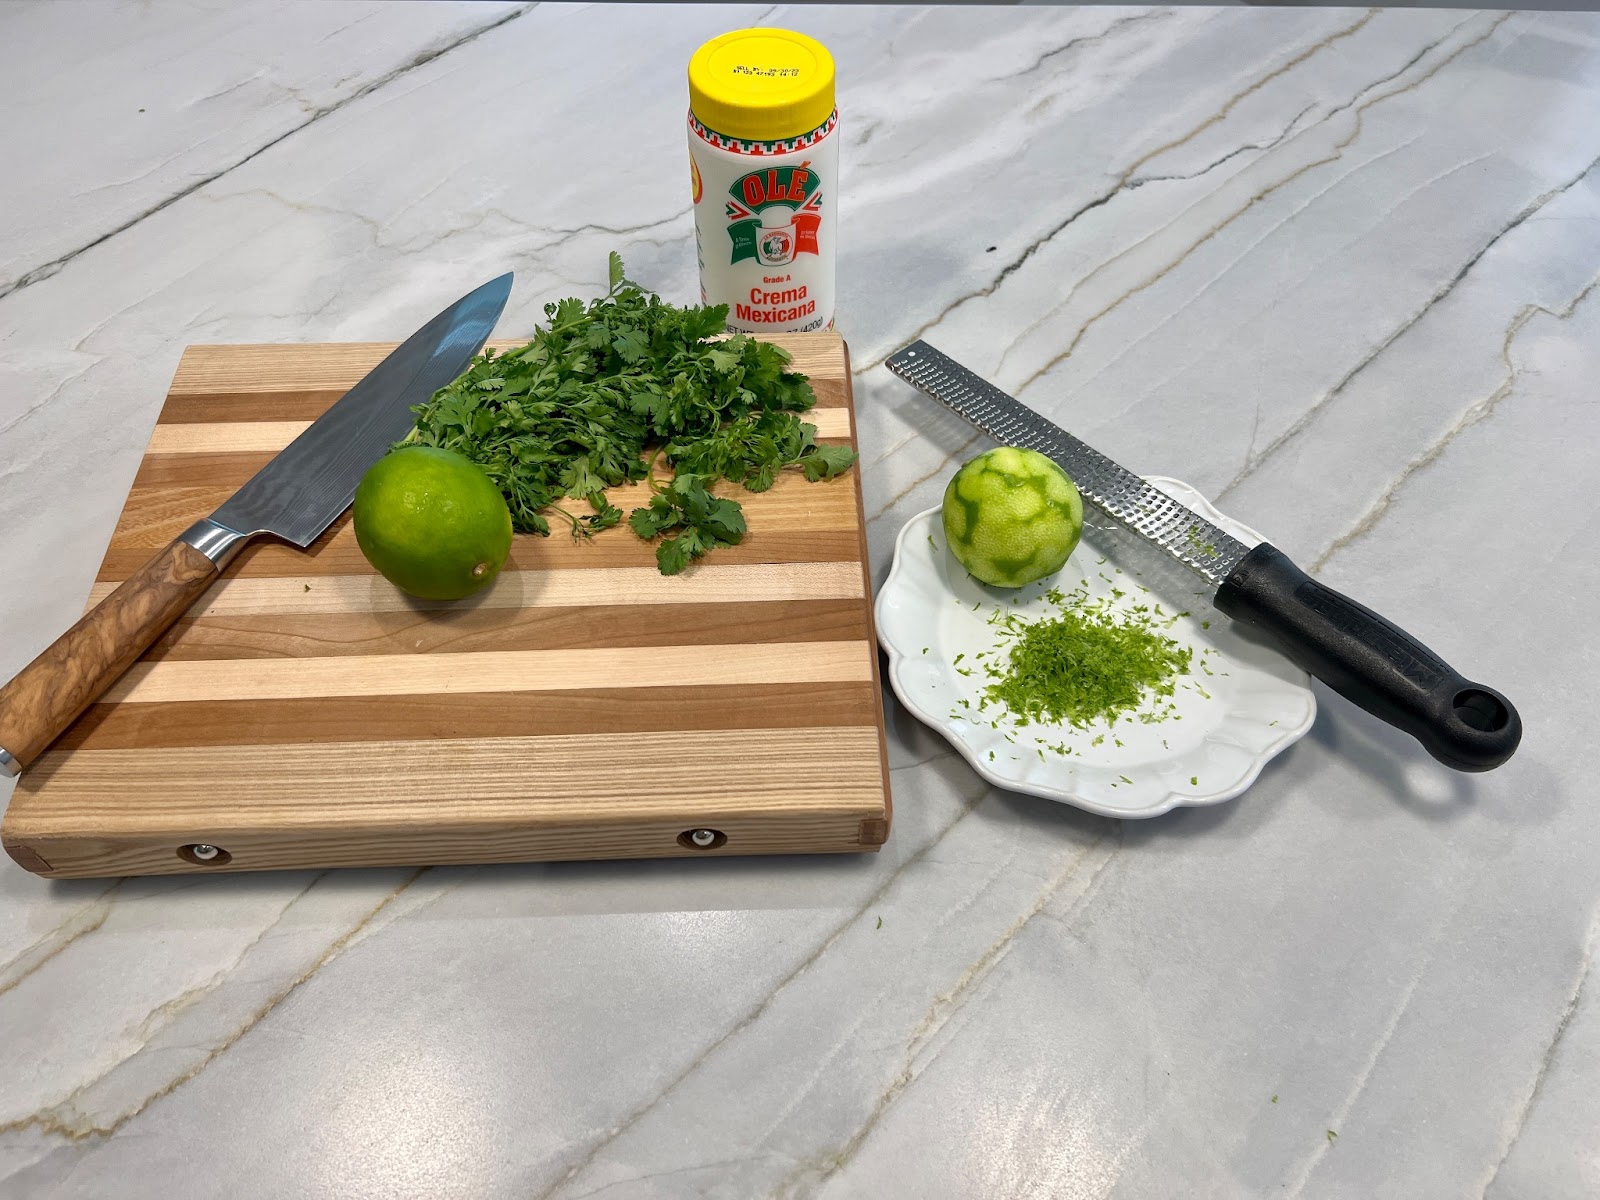 the three ingredients: cilantro, limes and crema Mexicana